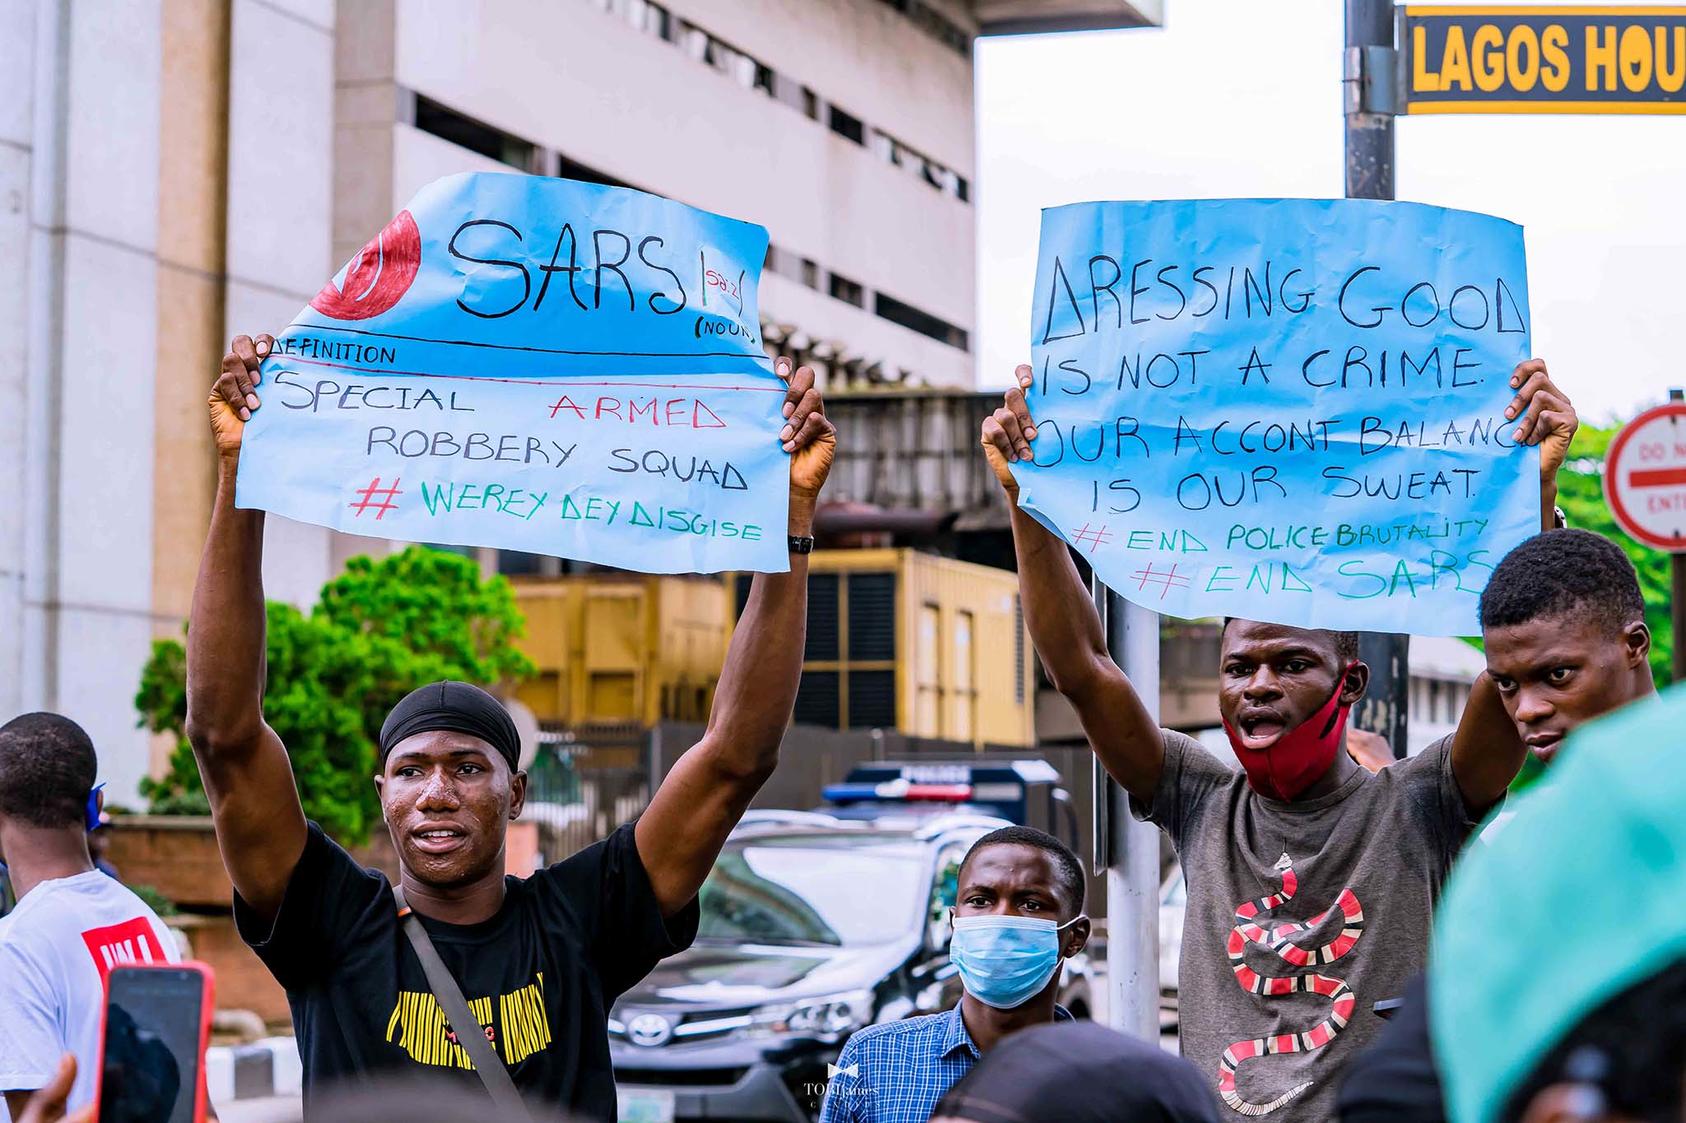 Nigerians in Lagos protest attacks and extortion against youth by the SARS police unit. “Dressing cool is not a crime,” a protester’s sign declares. (TobiJamesCandids/CC License 4.0)